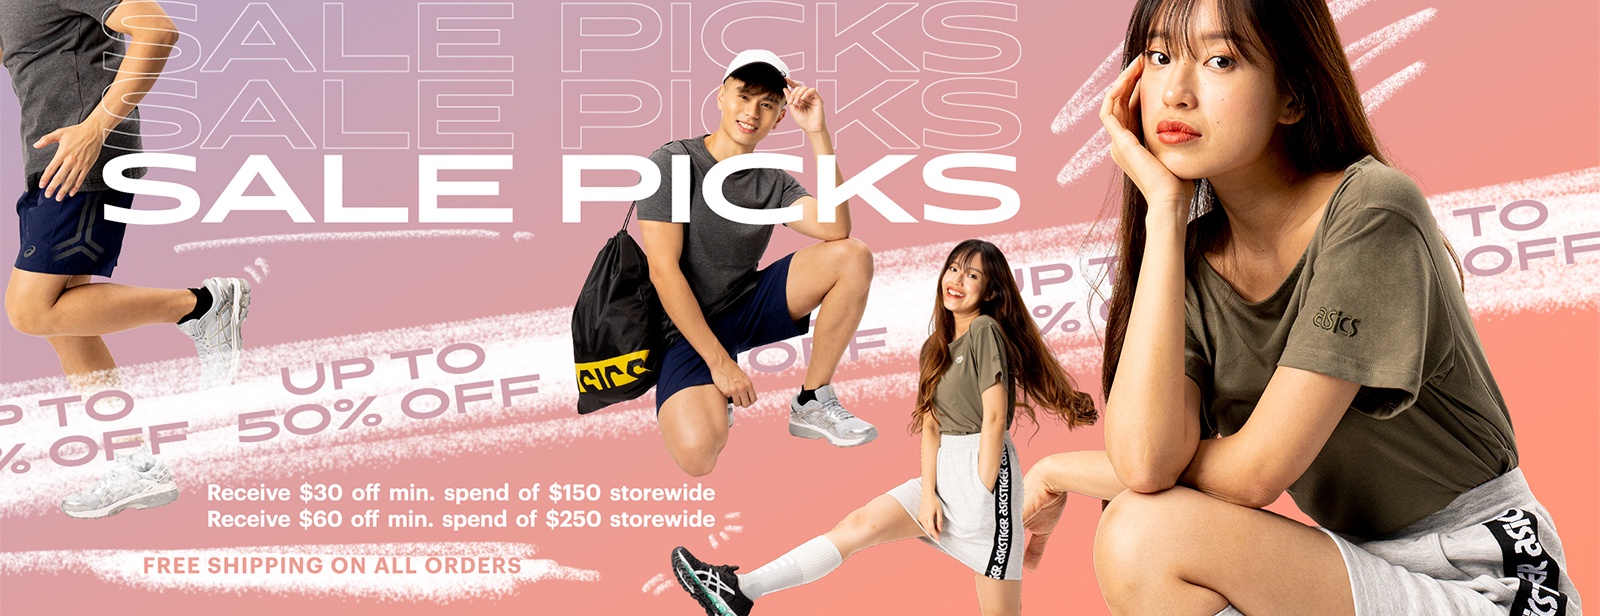 Sale Picks Up to 50% Off | ASICS Singapore Official